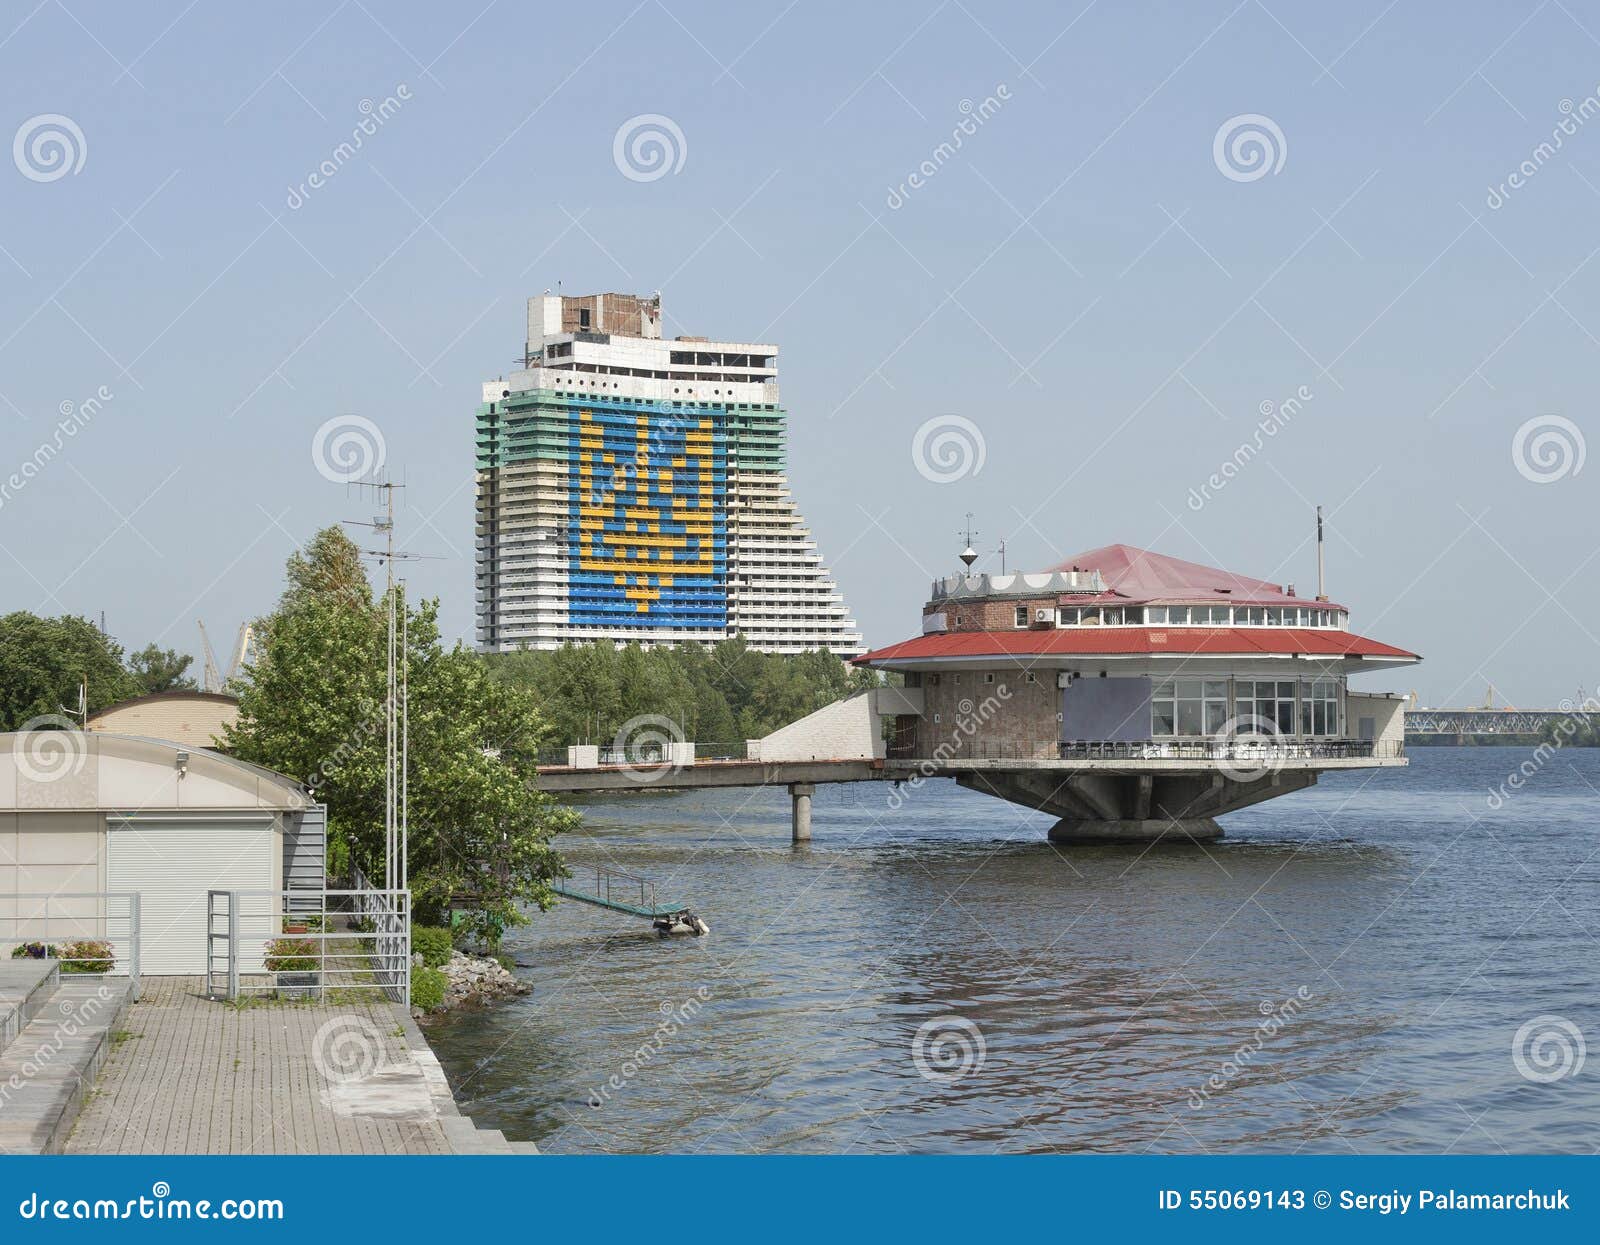 Dnipropetrovsk cityscape with Dnieper river, Ukraine. Dnipropetrovsk cityscape with Dnieper river and coat of arms of Ukraine performed on the facade of the unfinished hotel building, Ukraine